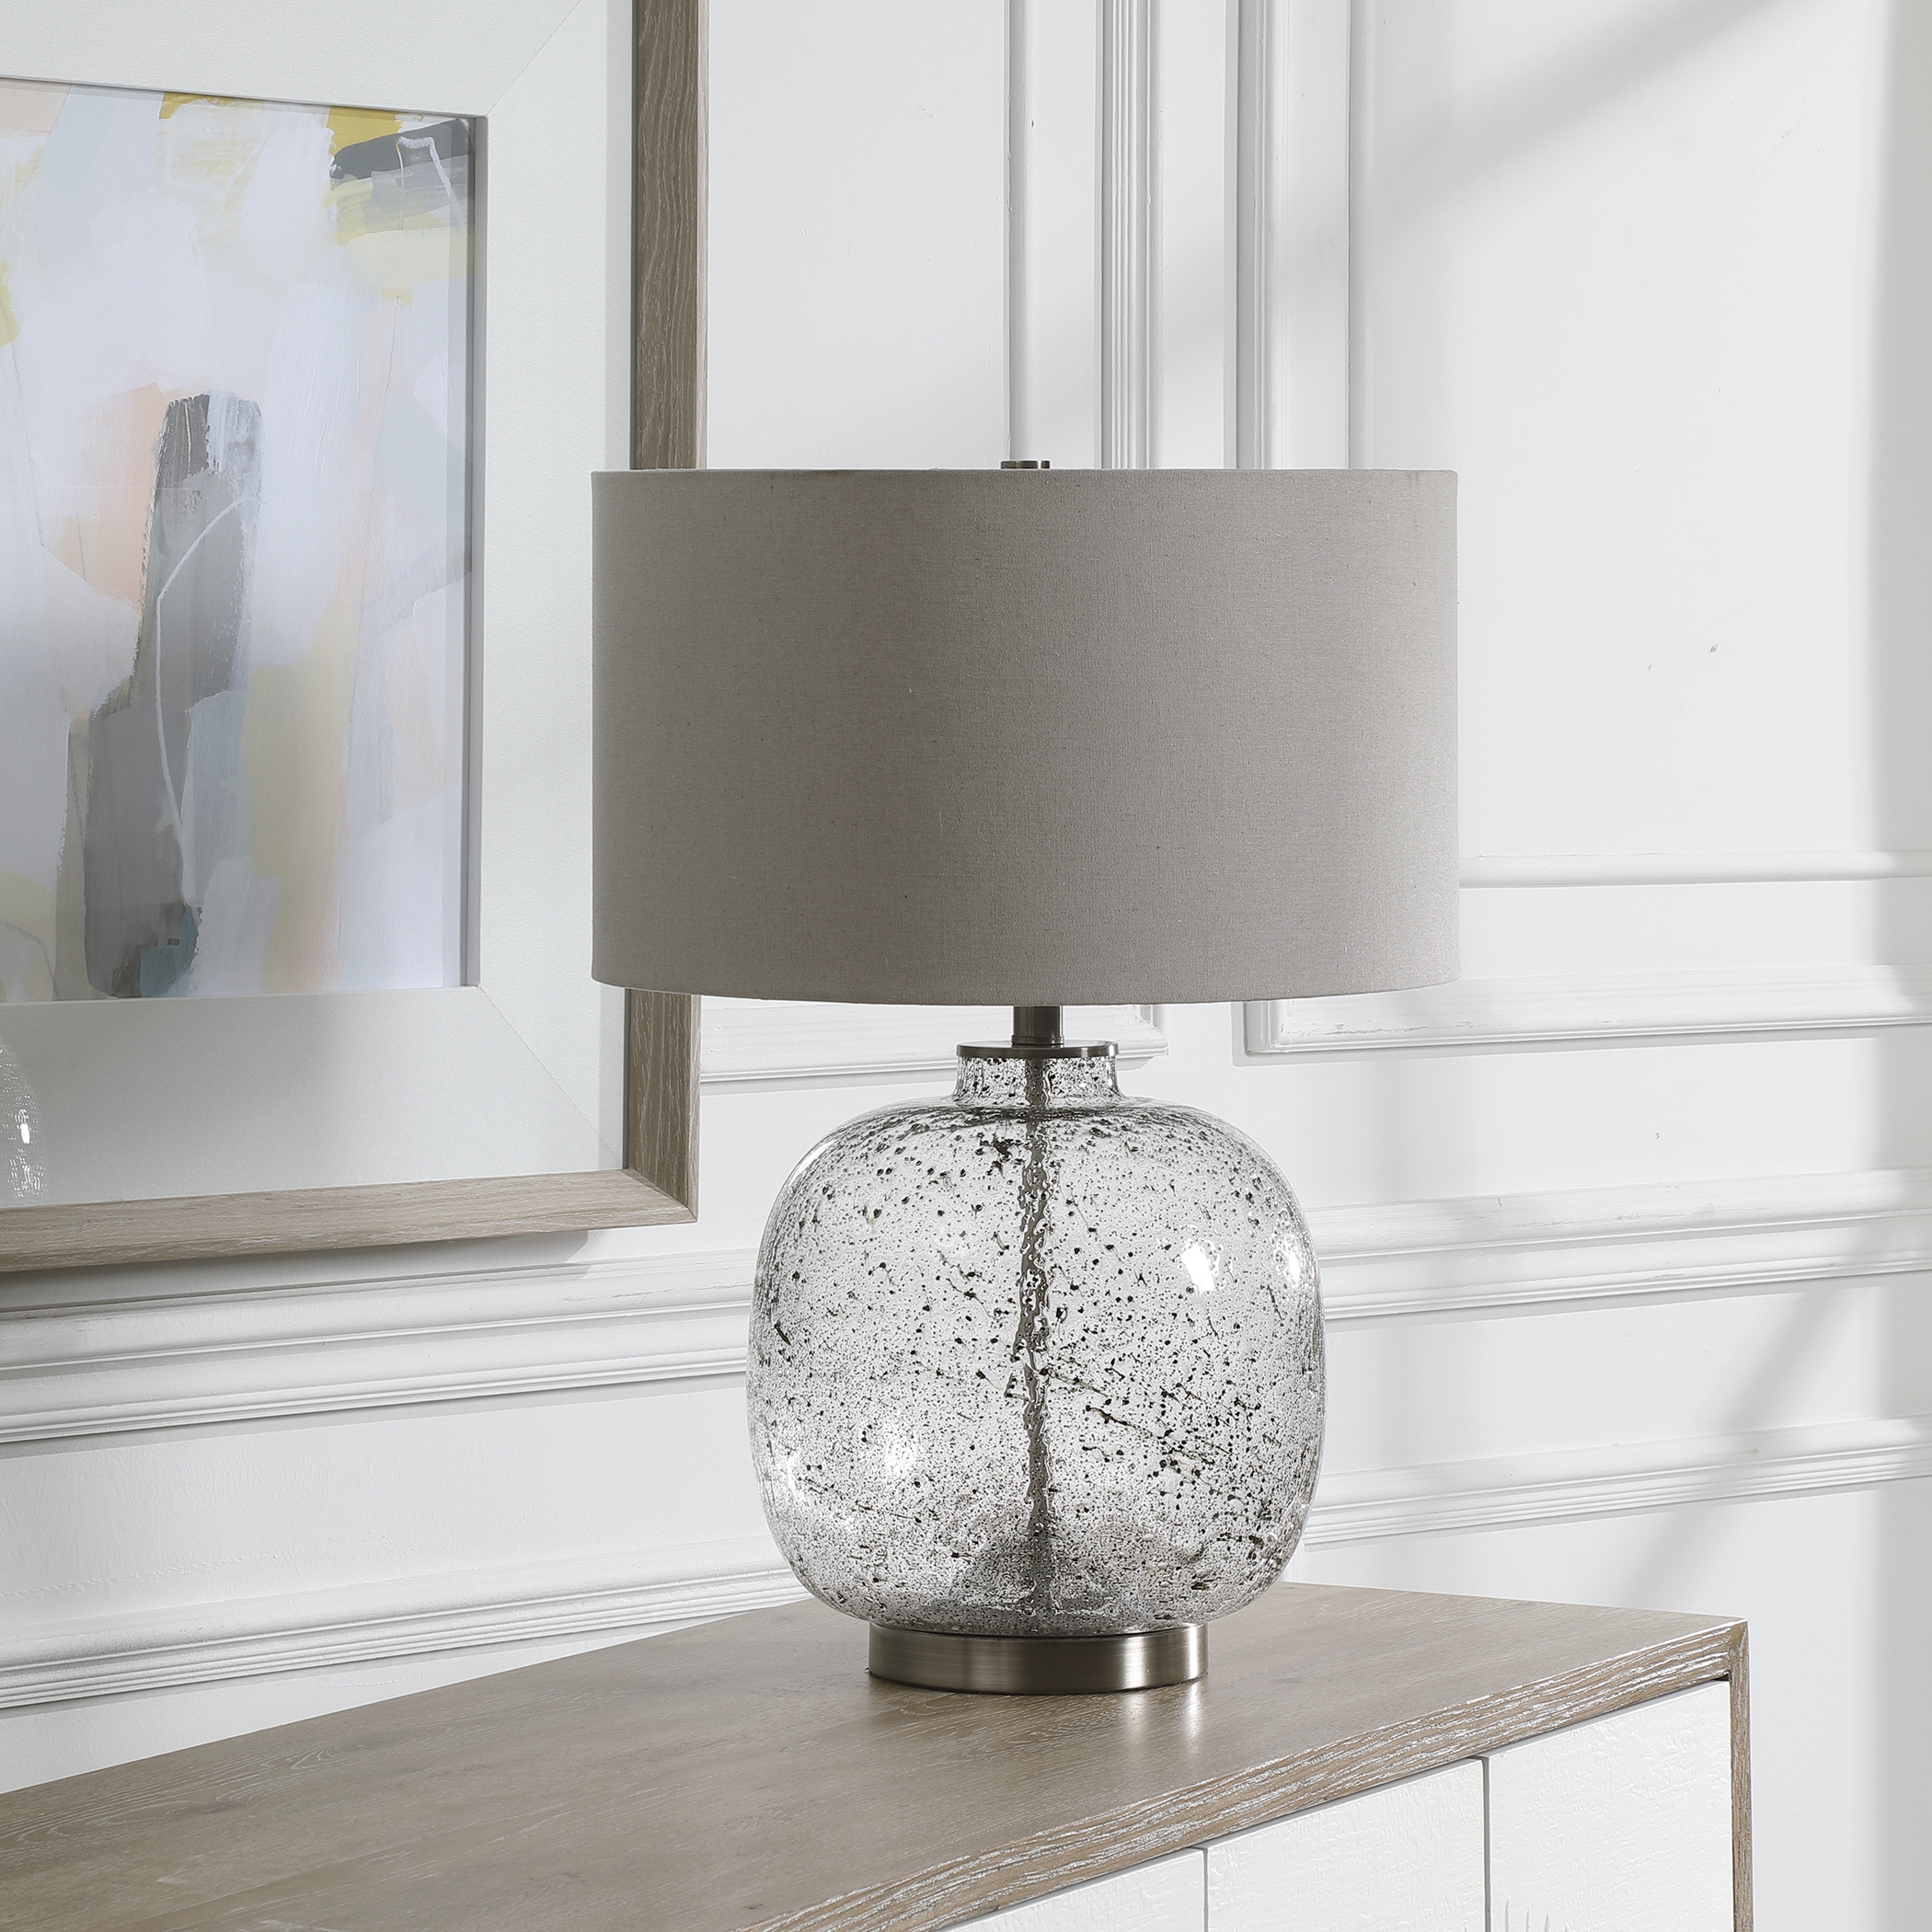 Storm Glass Table Lamp, 17" x 17" x 23.25" - Image 2